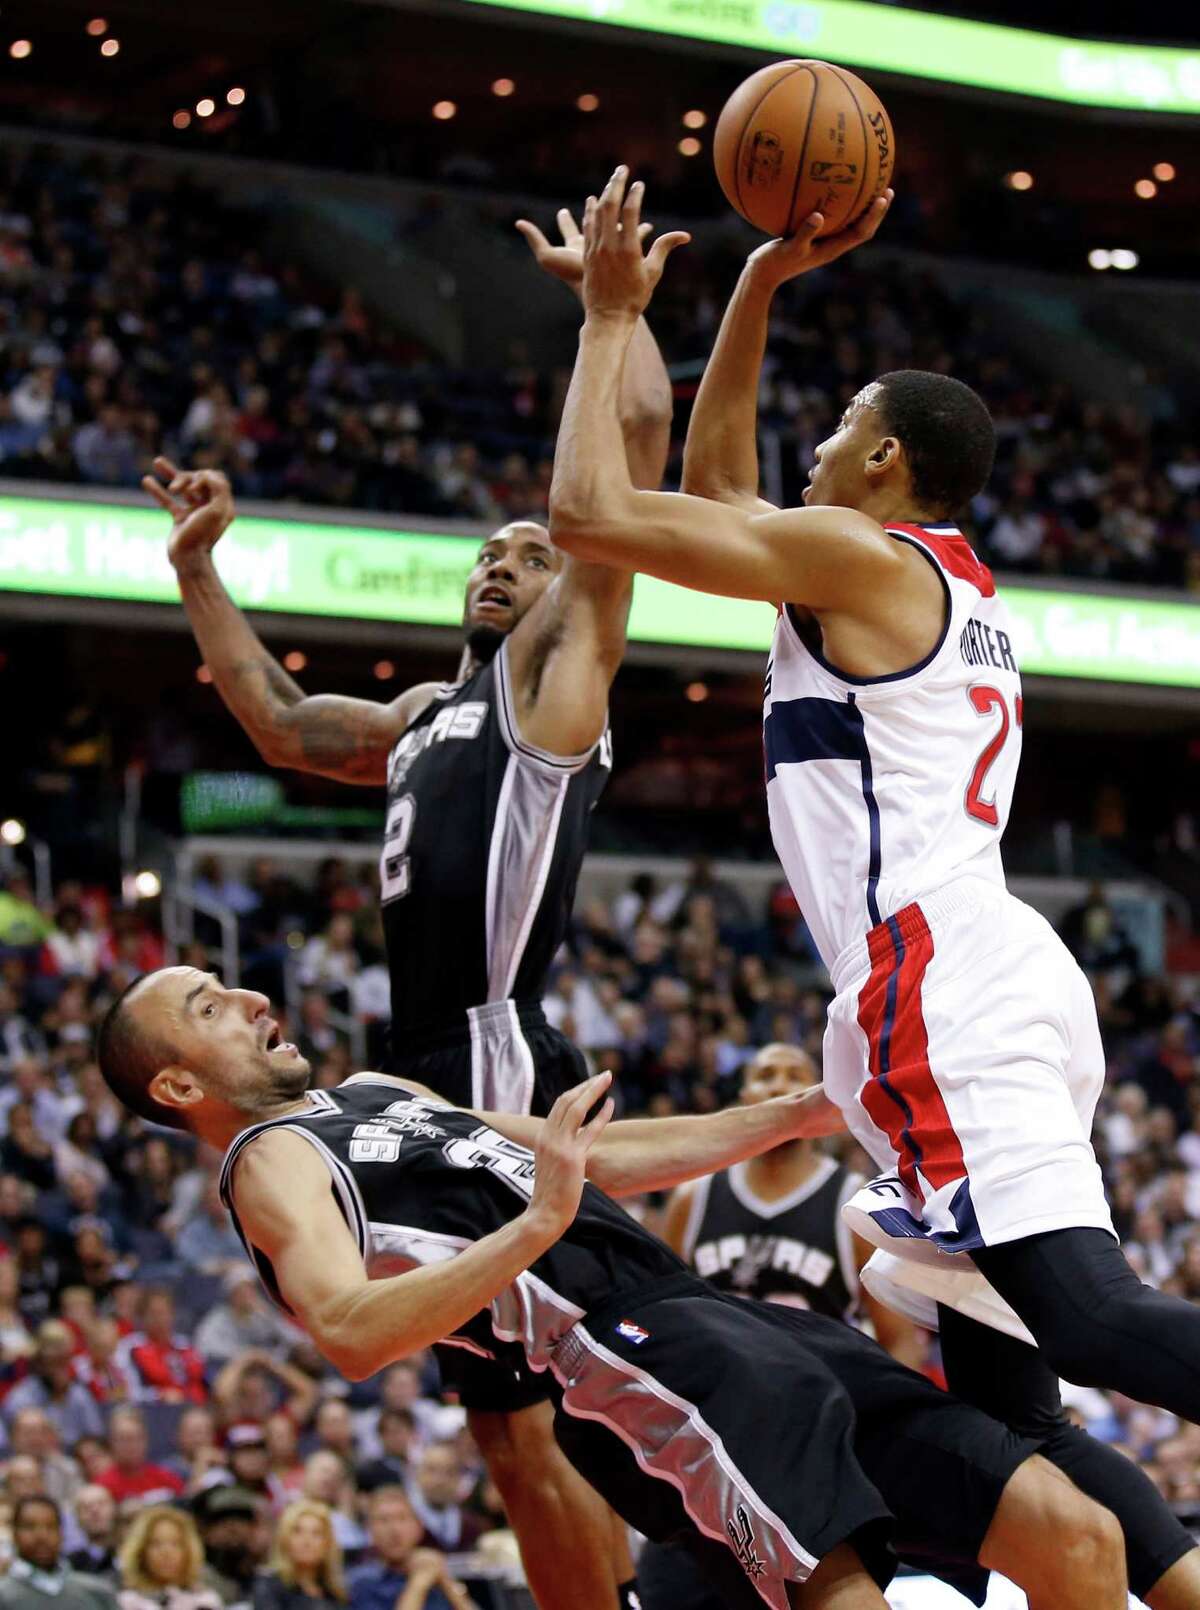 Spurs guard Manu Ginobili draws a charge from Washington Wizards forward Otto Porter Jr. with forward Kawhi Leonard nearby during the second half on Nov. 4, 2015, in Washington. The Wizards won 102-99.